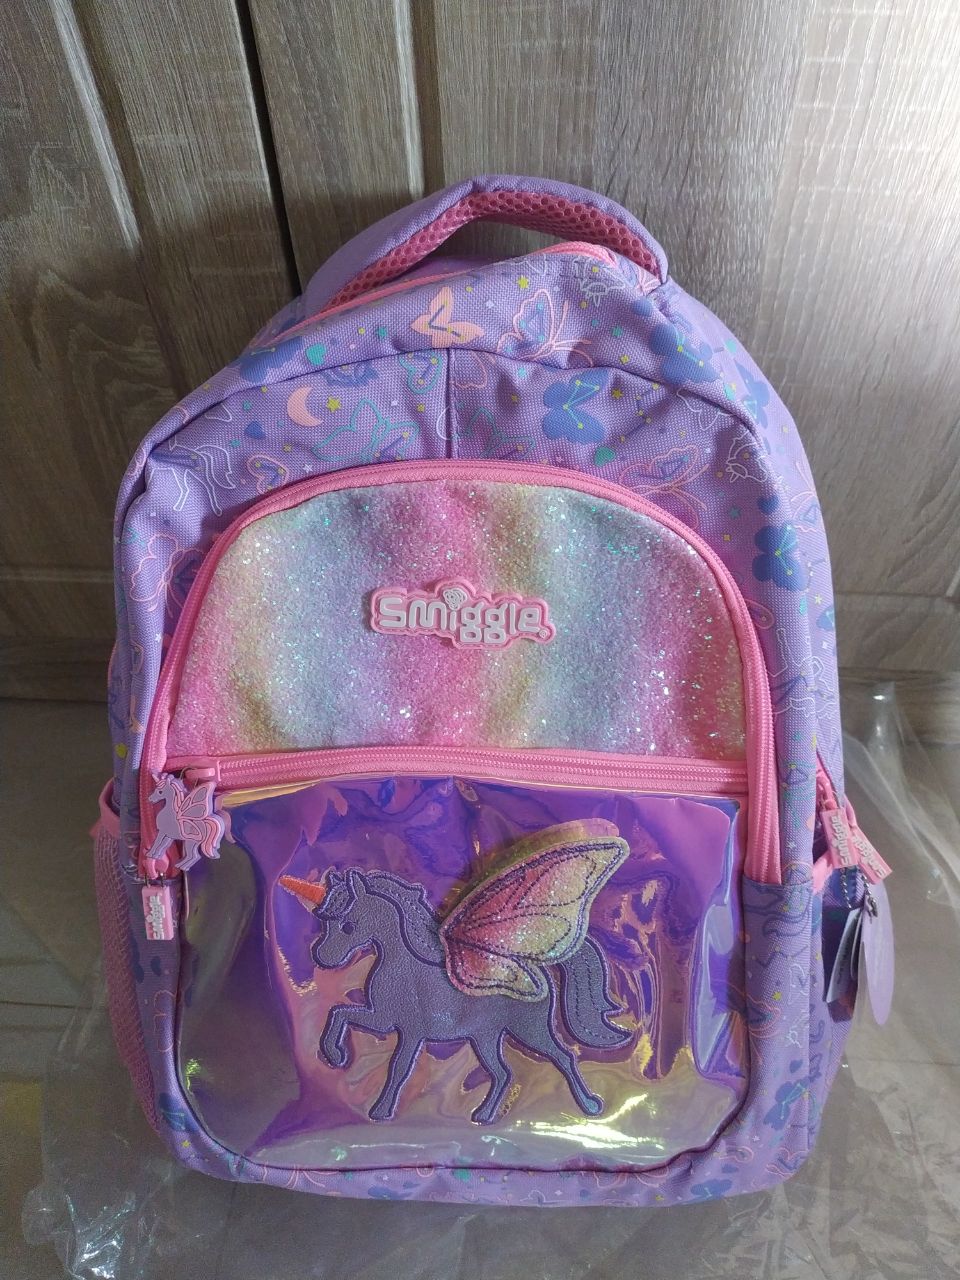 Smiggle - Our best selling Sky backpack features glitter panels and 3D  unicorn wings 🦄 perfect for school or sleepovers!